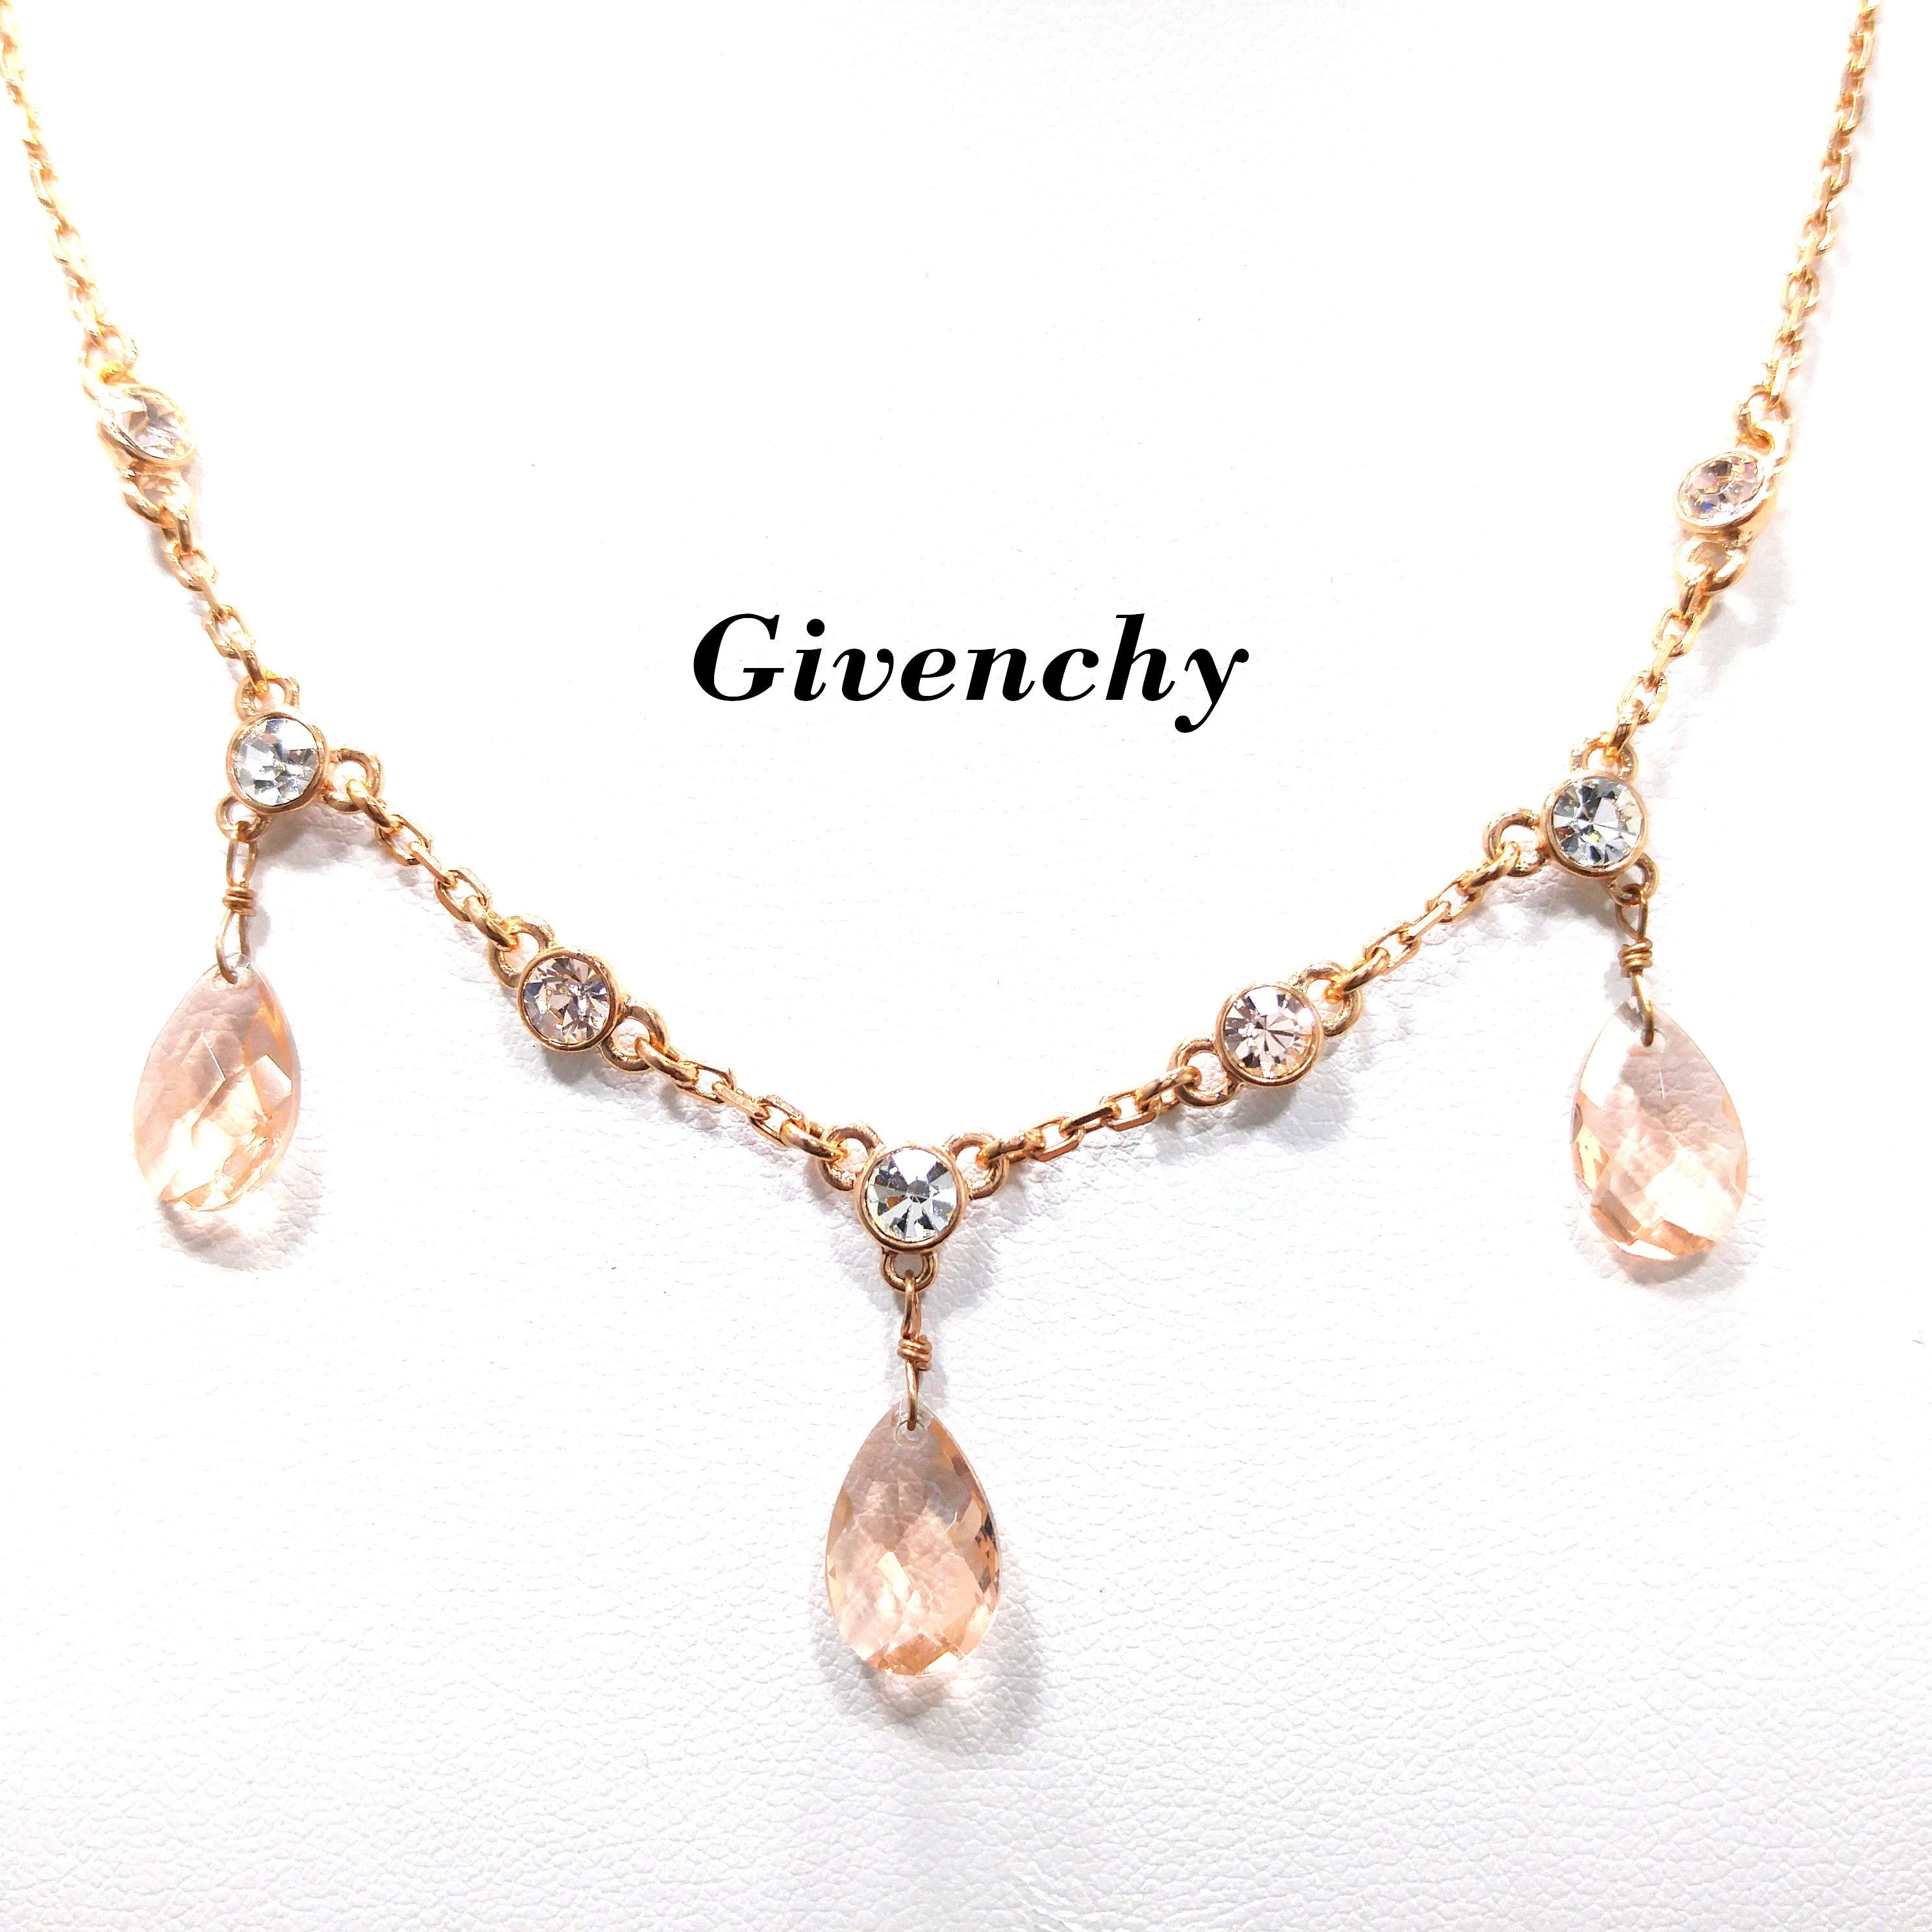 Buy Givenchy Topaz Rhinestone Pendant Necklace, Gold Plated, 1990s Vintage  Jewelry Online in India - Etsy